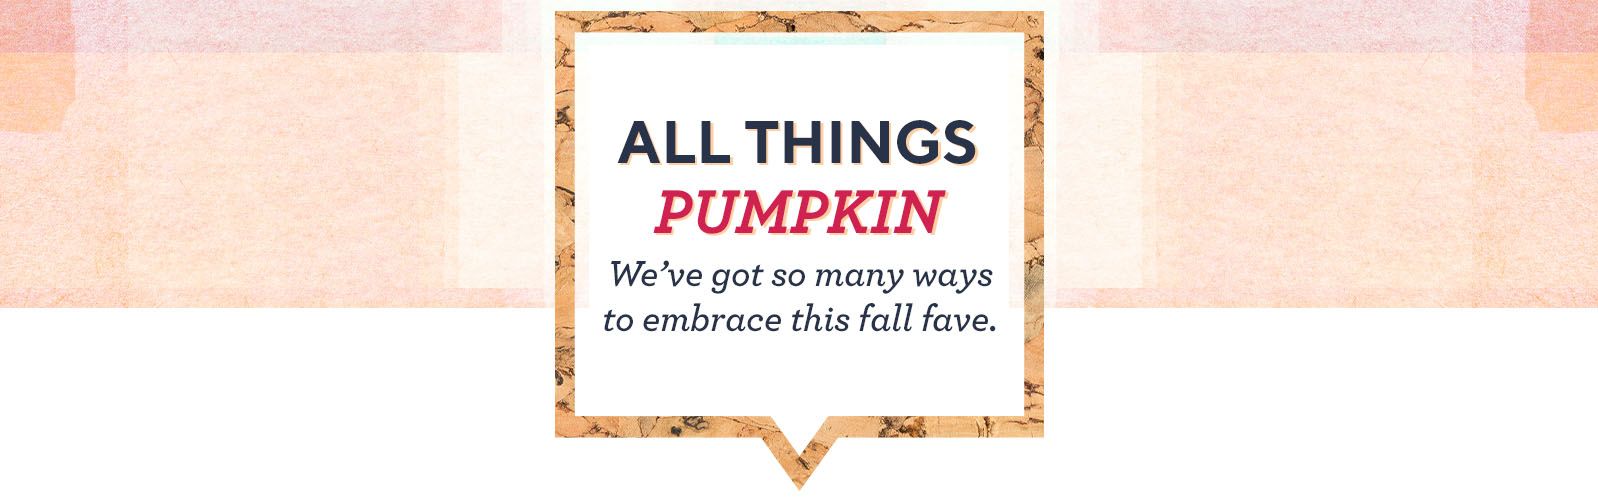 All Things Pumpkin  We've got so many ways to embrace this fall fave. 